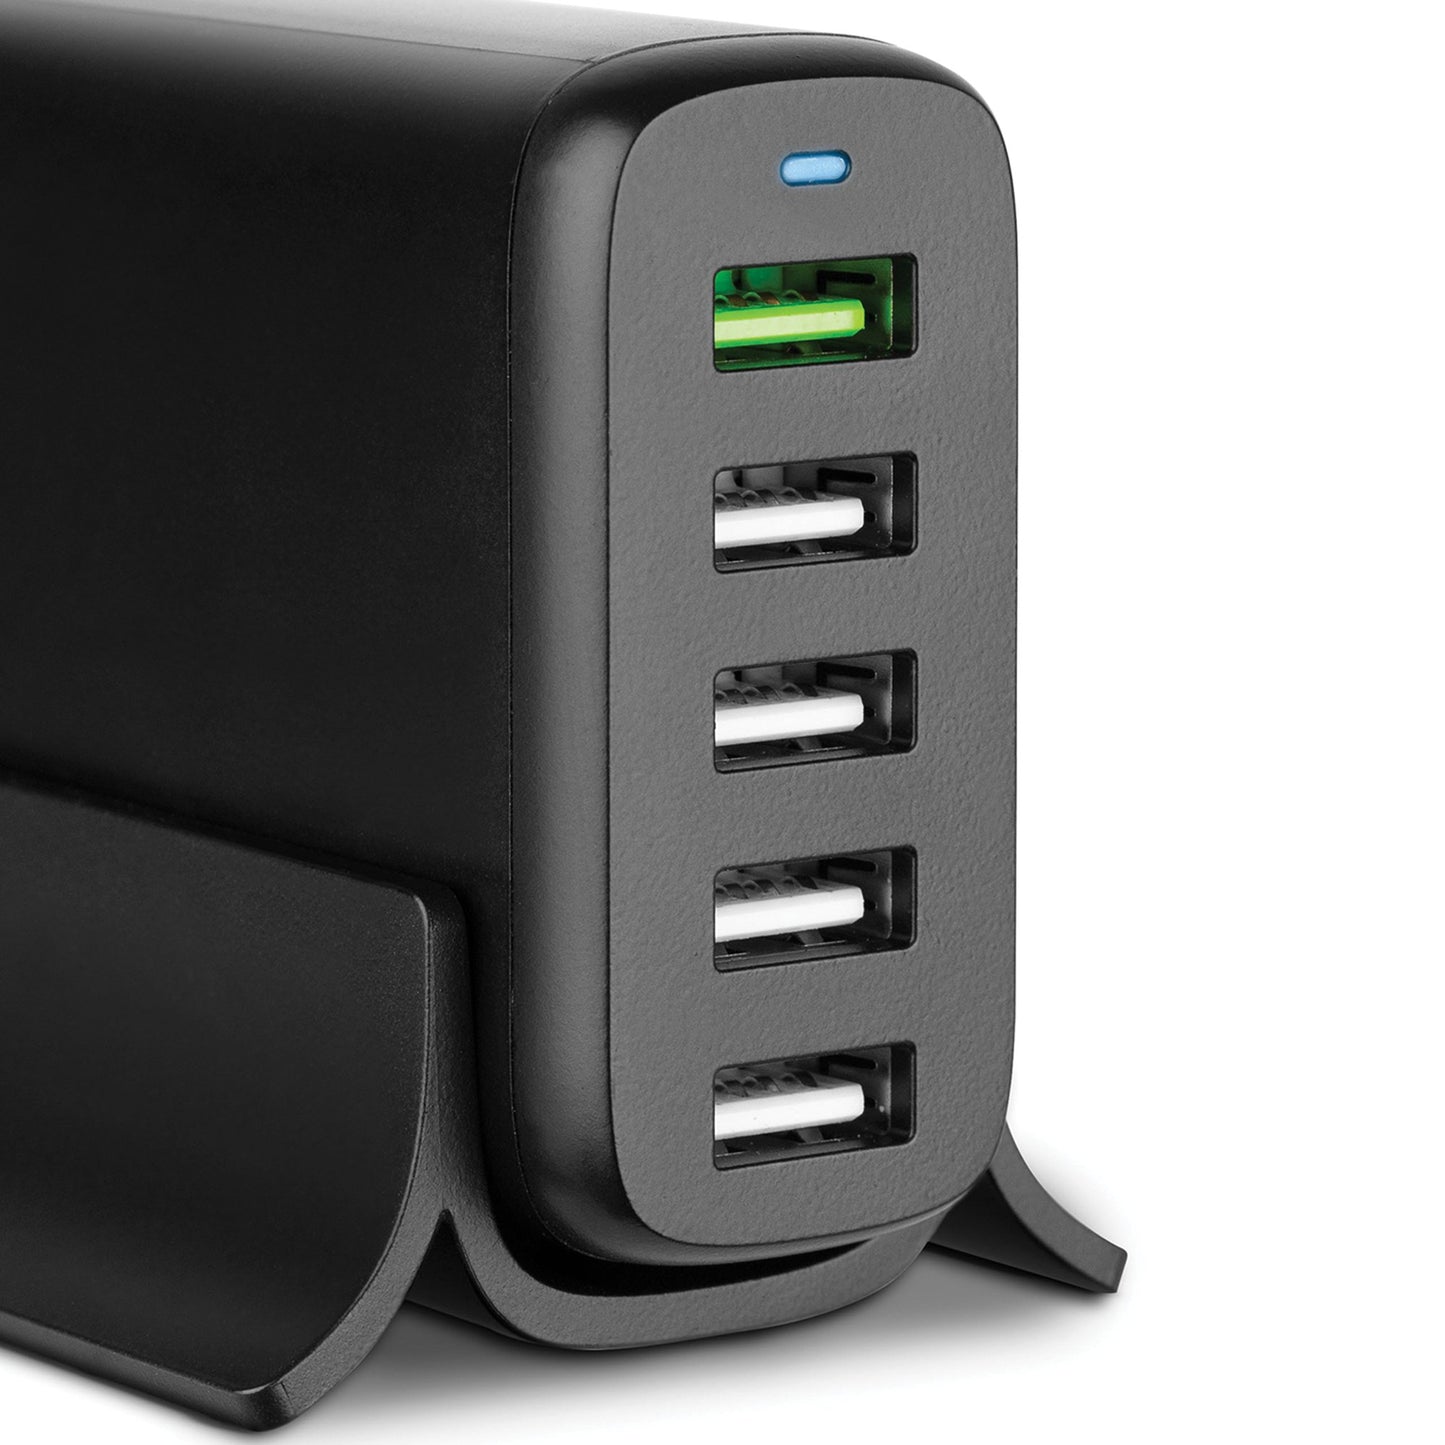 AT&T UH5 Portable USB Charging Station with 5 USB ports